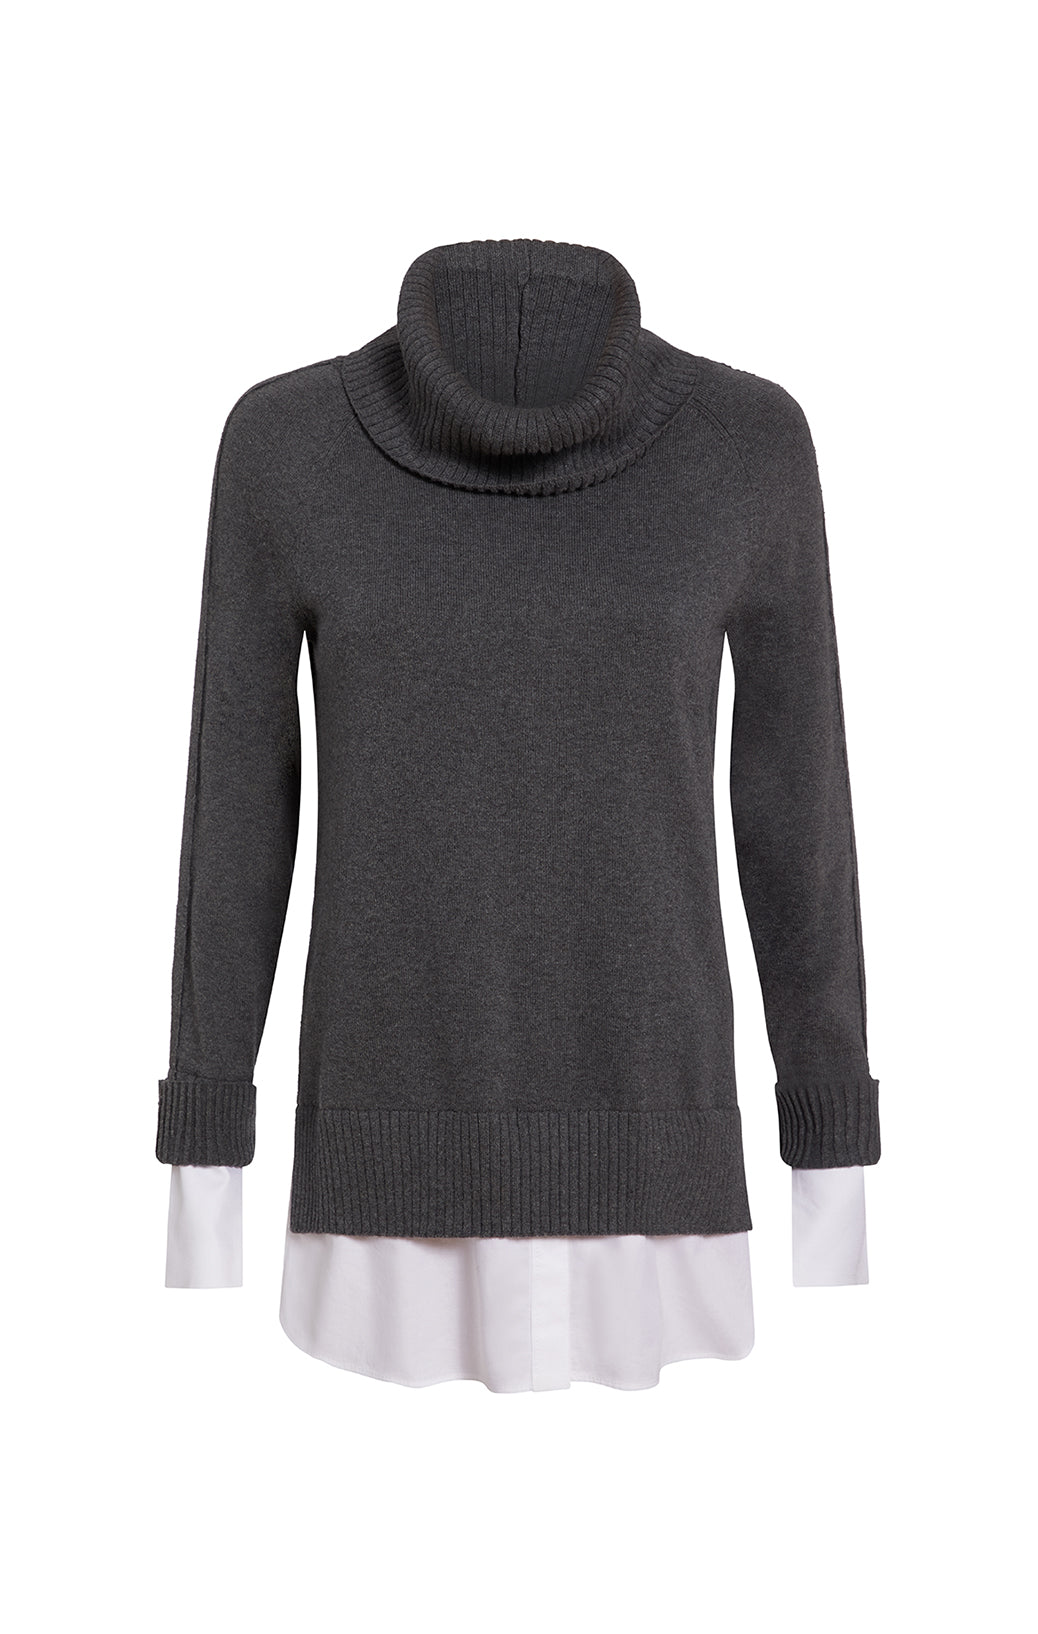 Caladenia - Cashmere-Softened Wrap-Look Sweater - Product Image